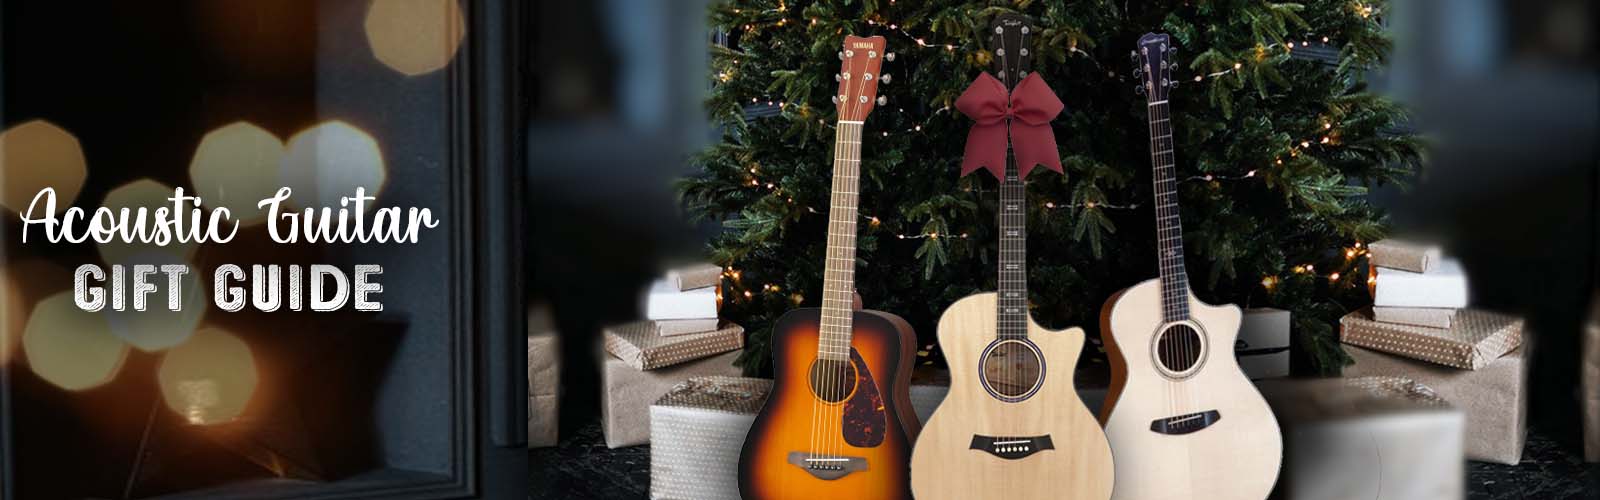 Acoustic Guitar Gift Guide Banner